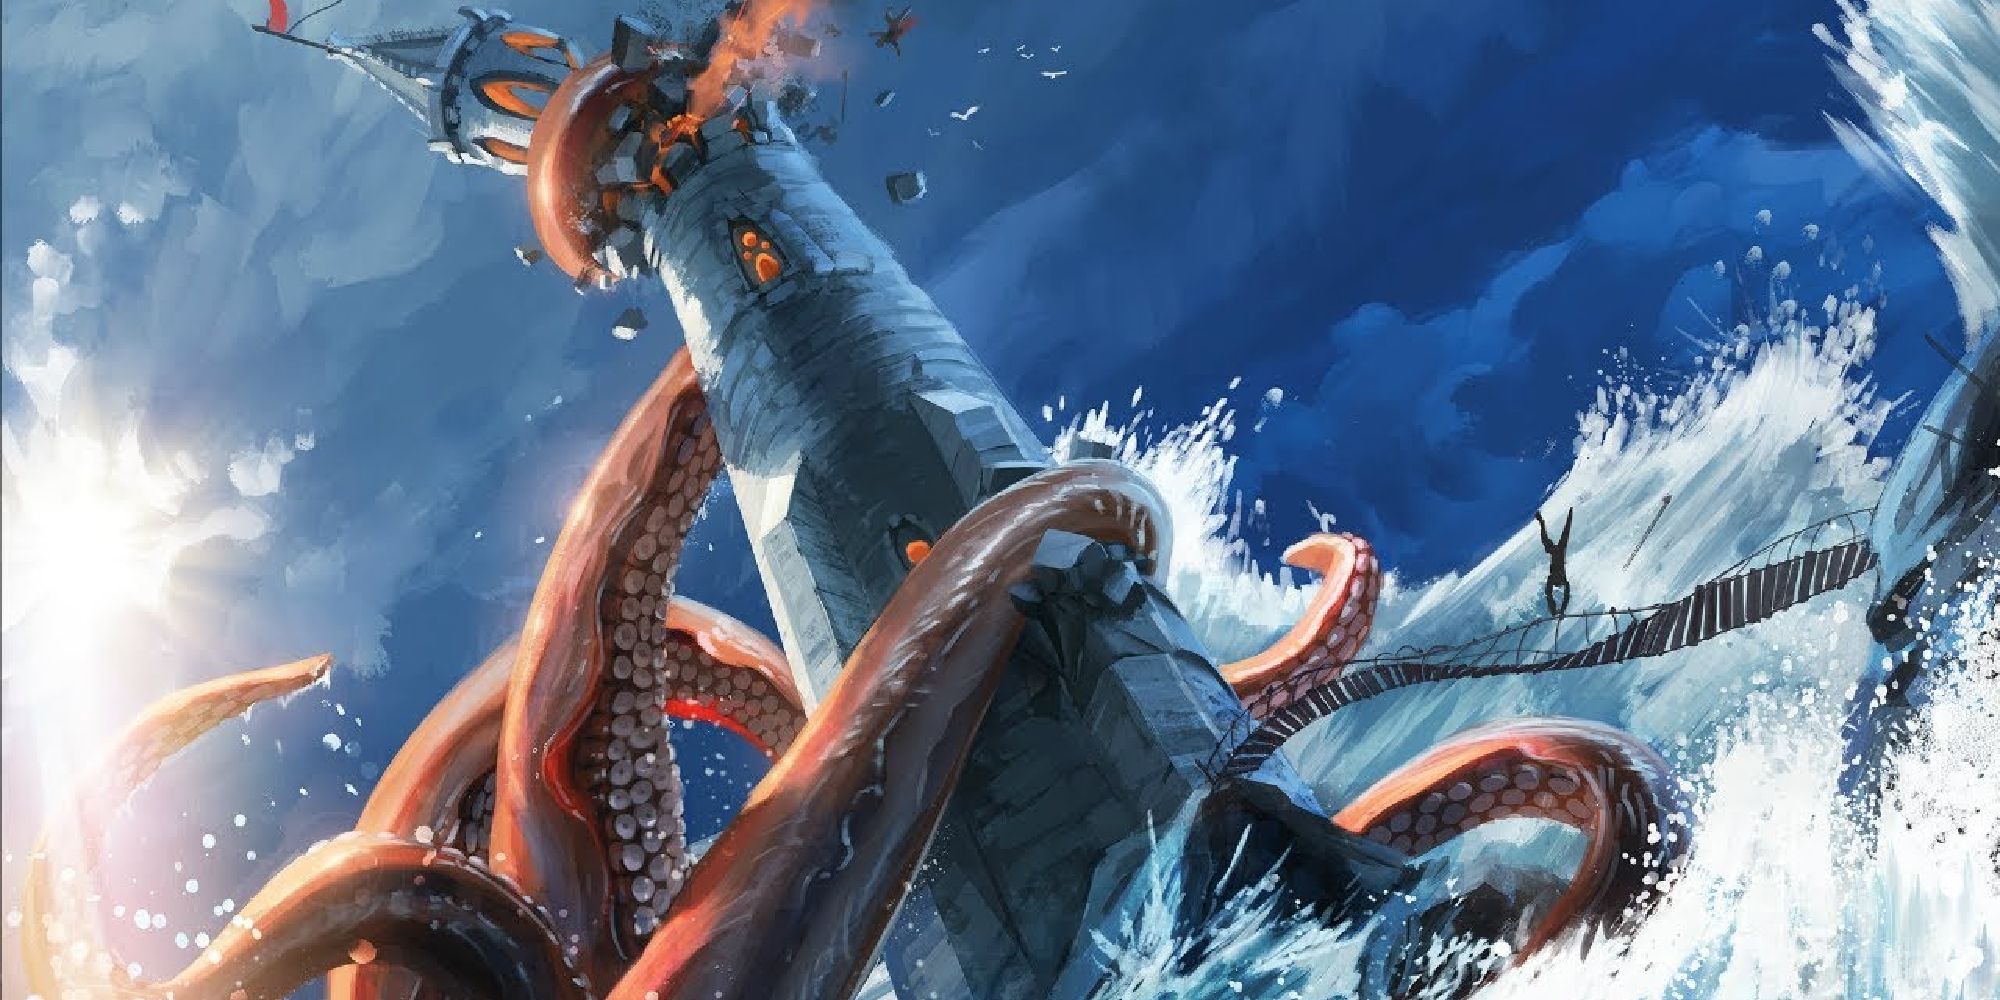 A kraken destroys a tall tower, creating a huge tidal wave of water.